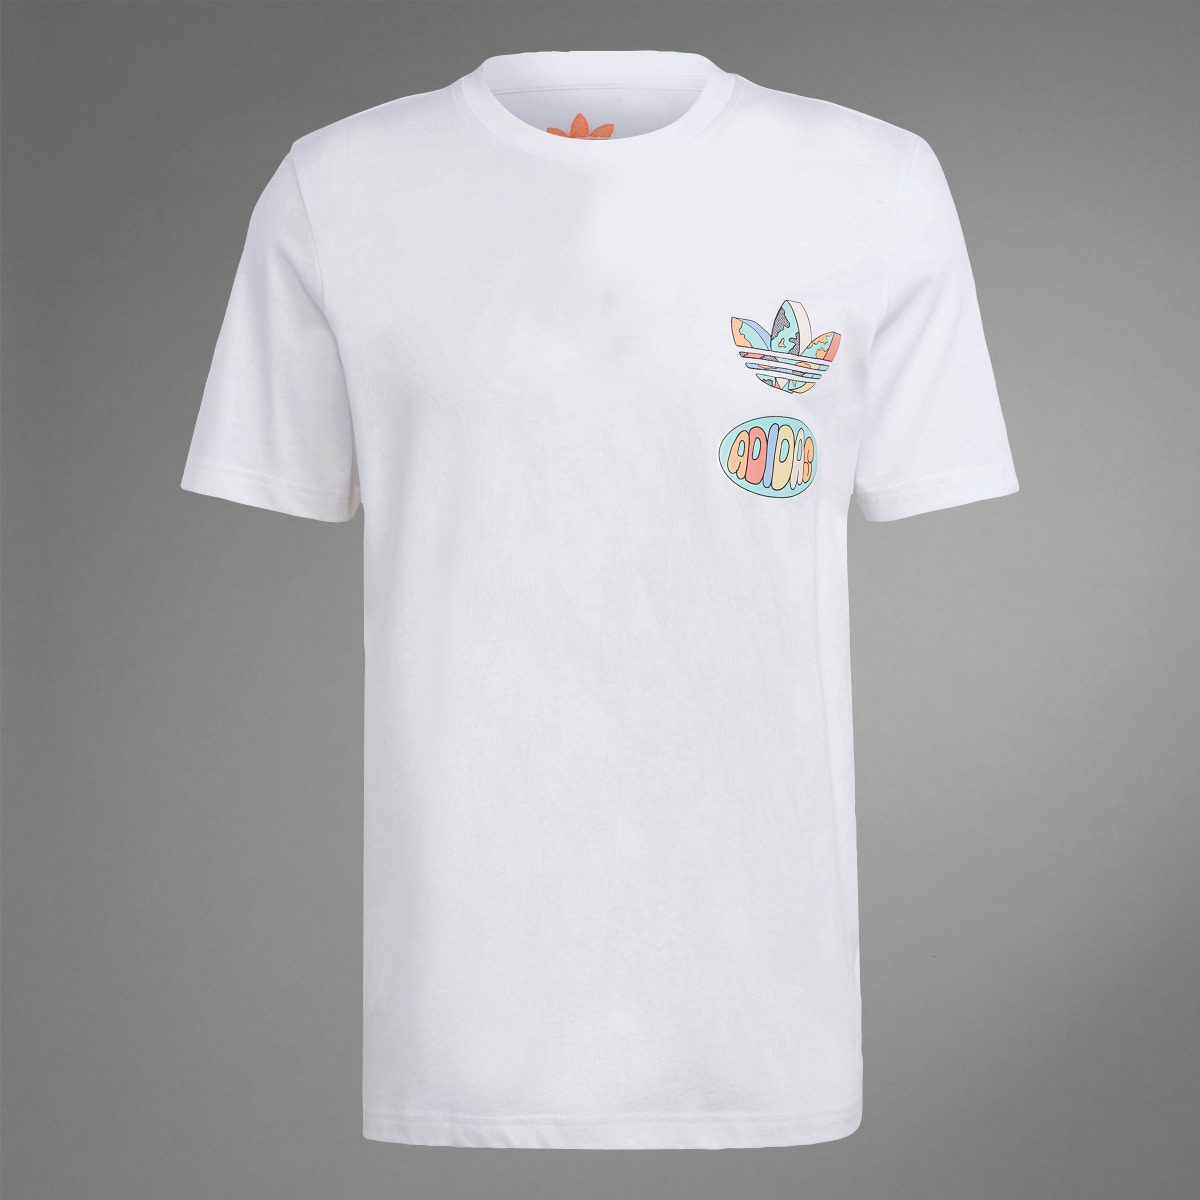 Adidas Enjoy Summer Front/Back Graphic Tee. 10